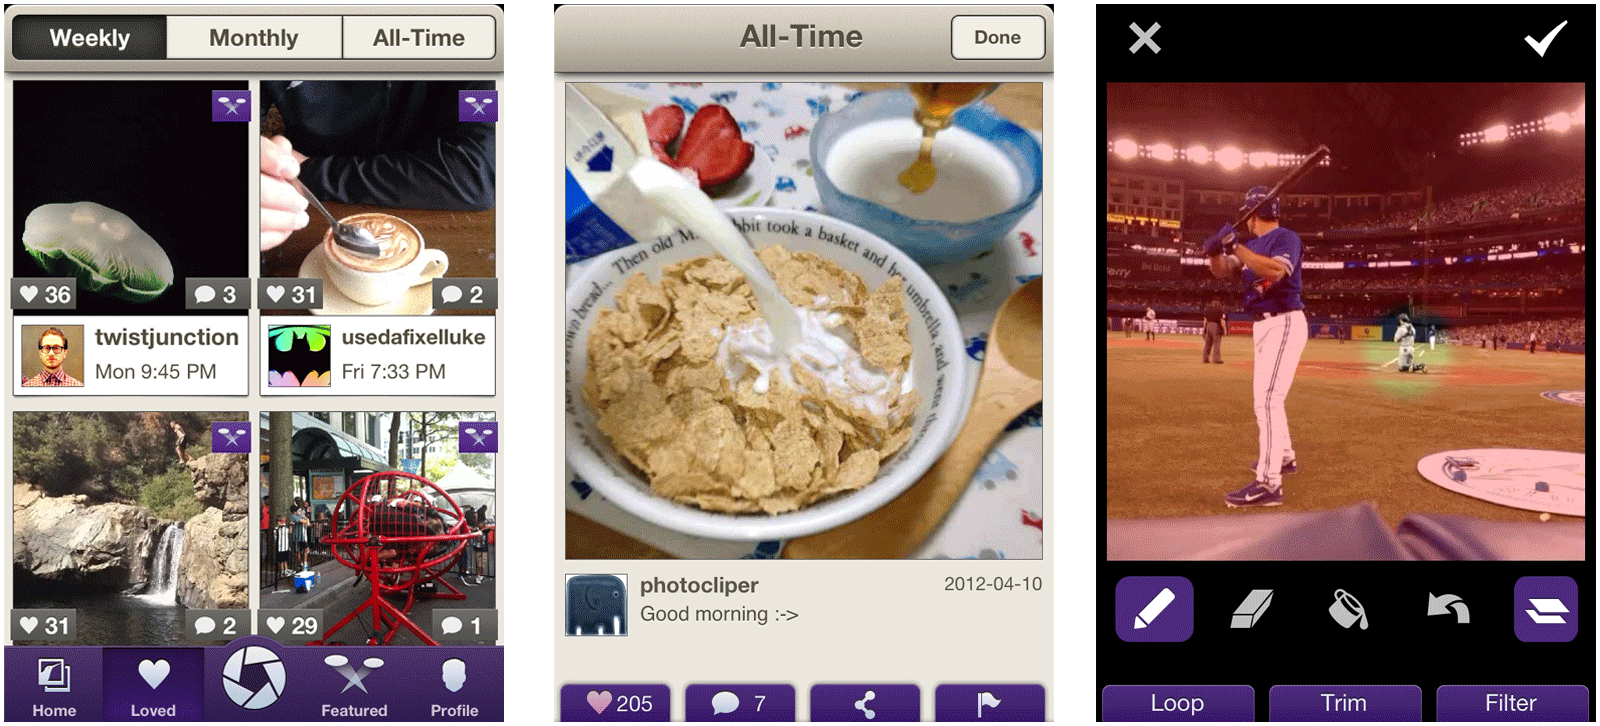 Screenshot of the Feed, View, and Edit screens from the original Flixel app